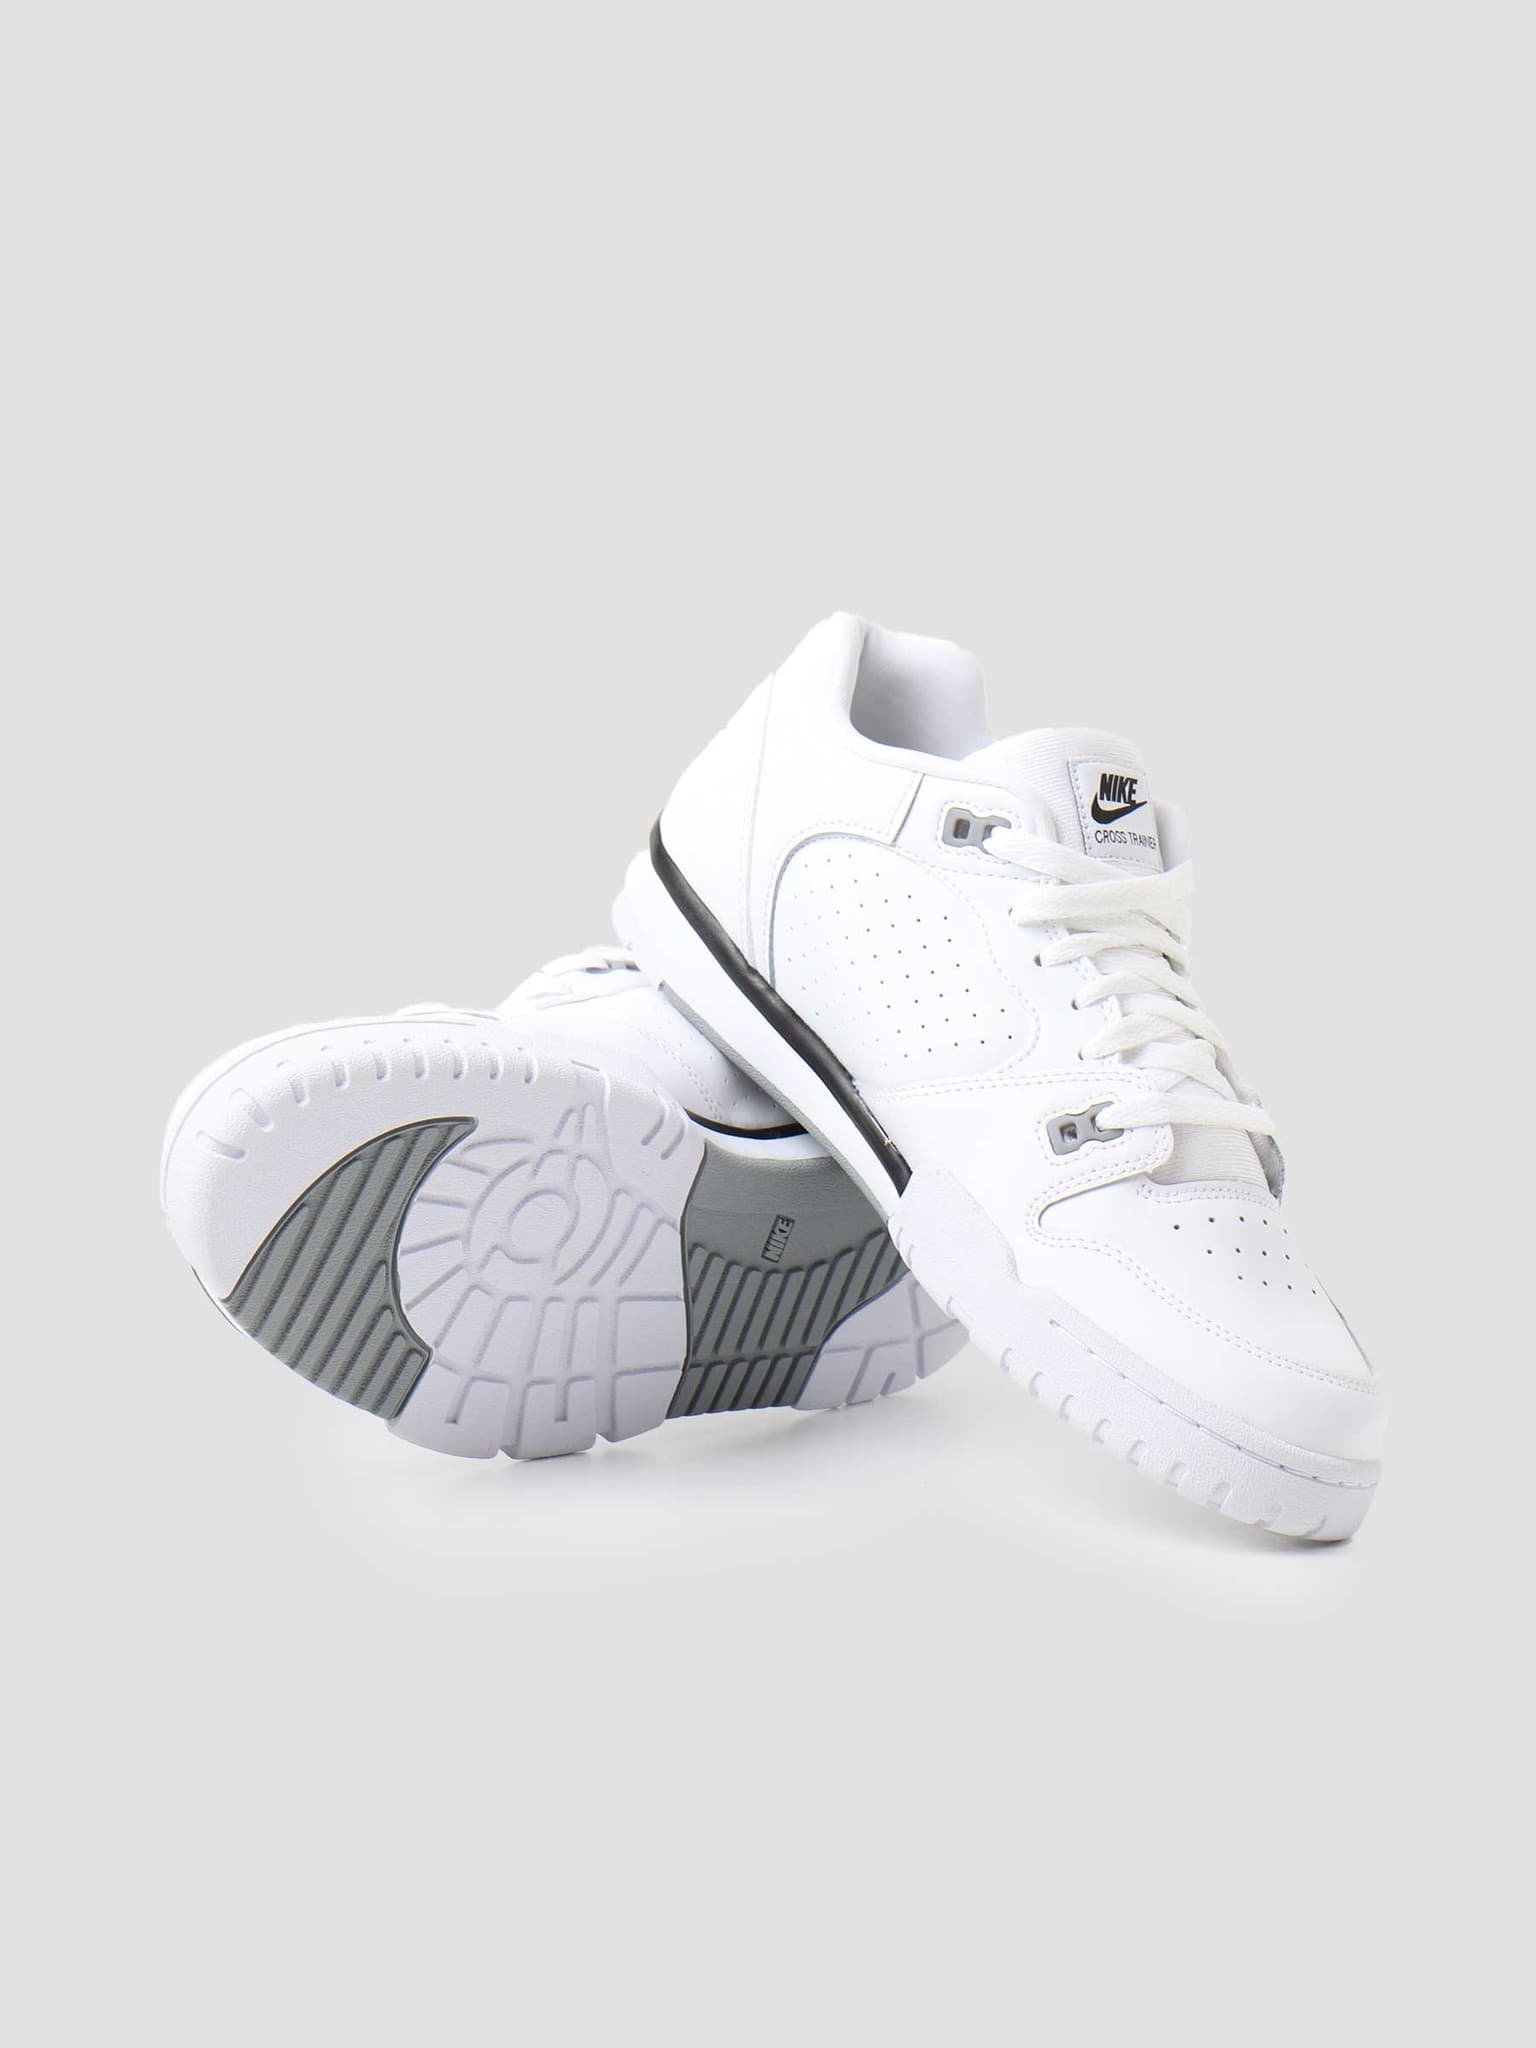 Nike Cross Trainer Low White Black Particle Grey CQ9182-106